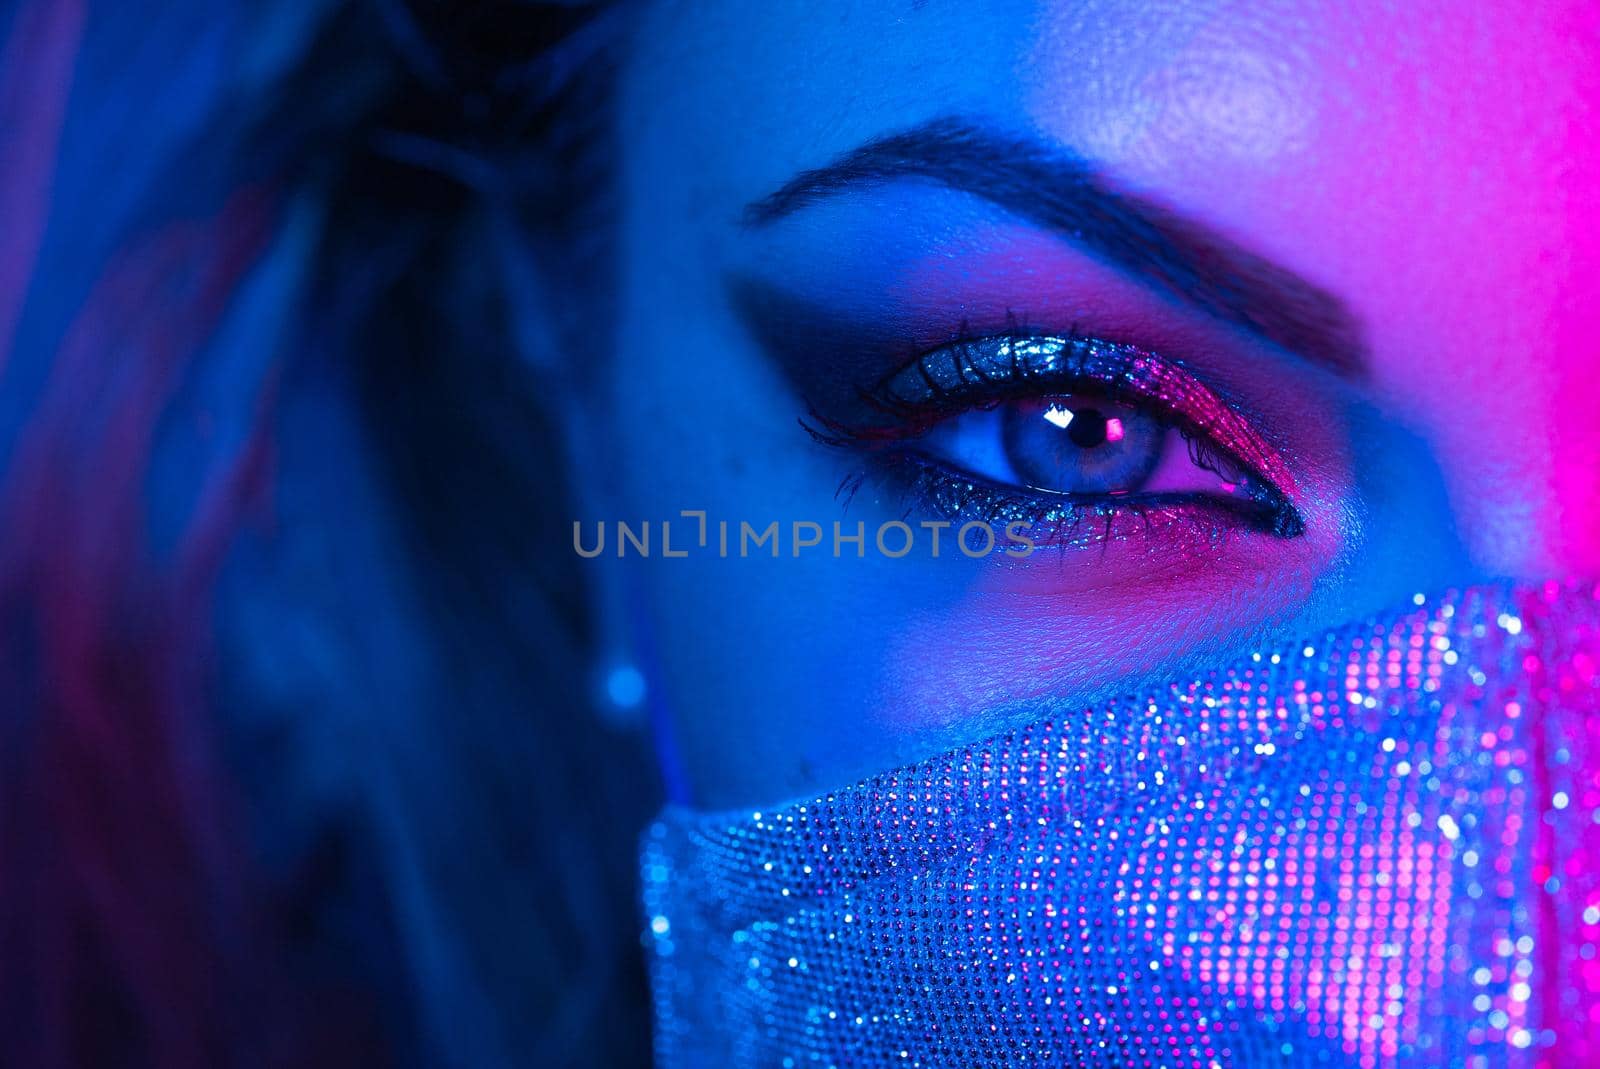 Close up of face in glitter protective mask, amazing make-up. Eye under neon light. Female with shining shadows and false lashes. Nightlife, night club, pandemic, covid-19 concept. High quality photo